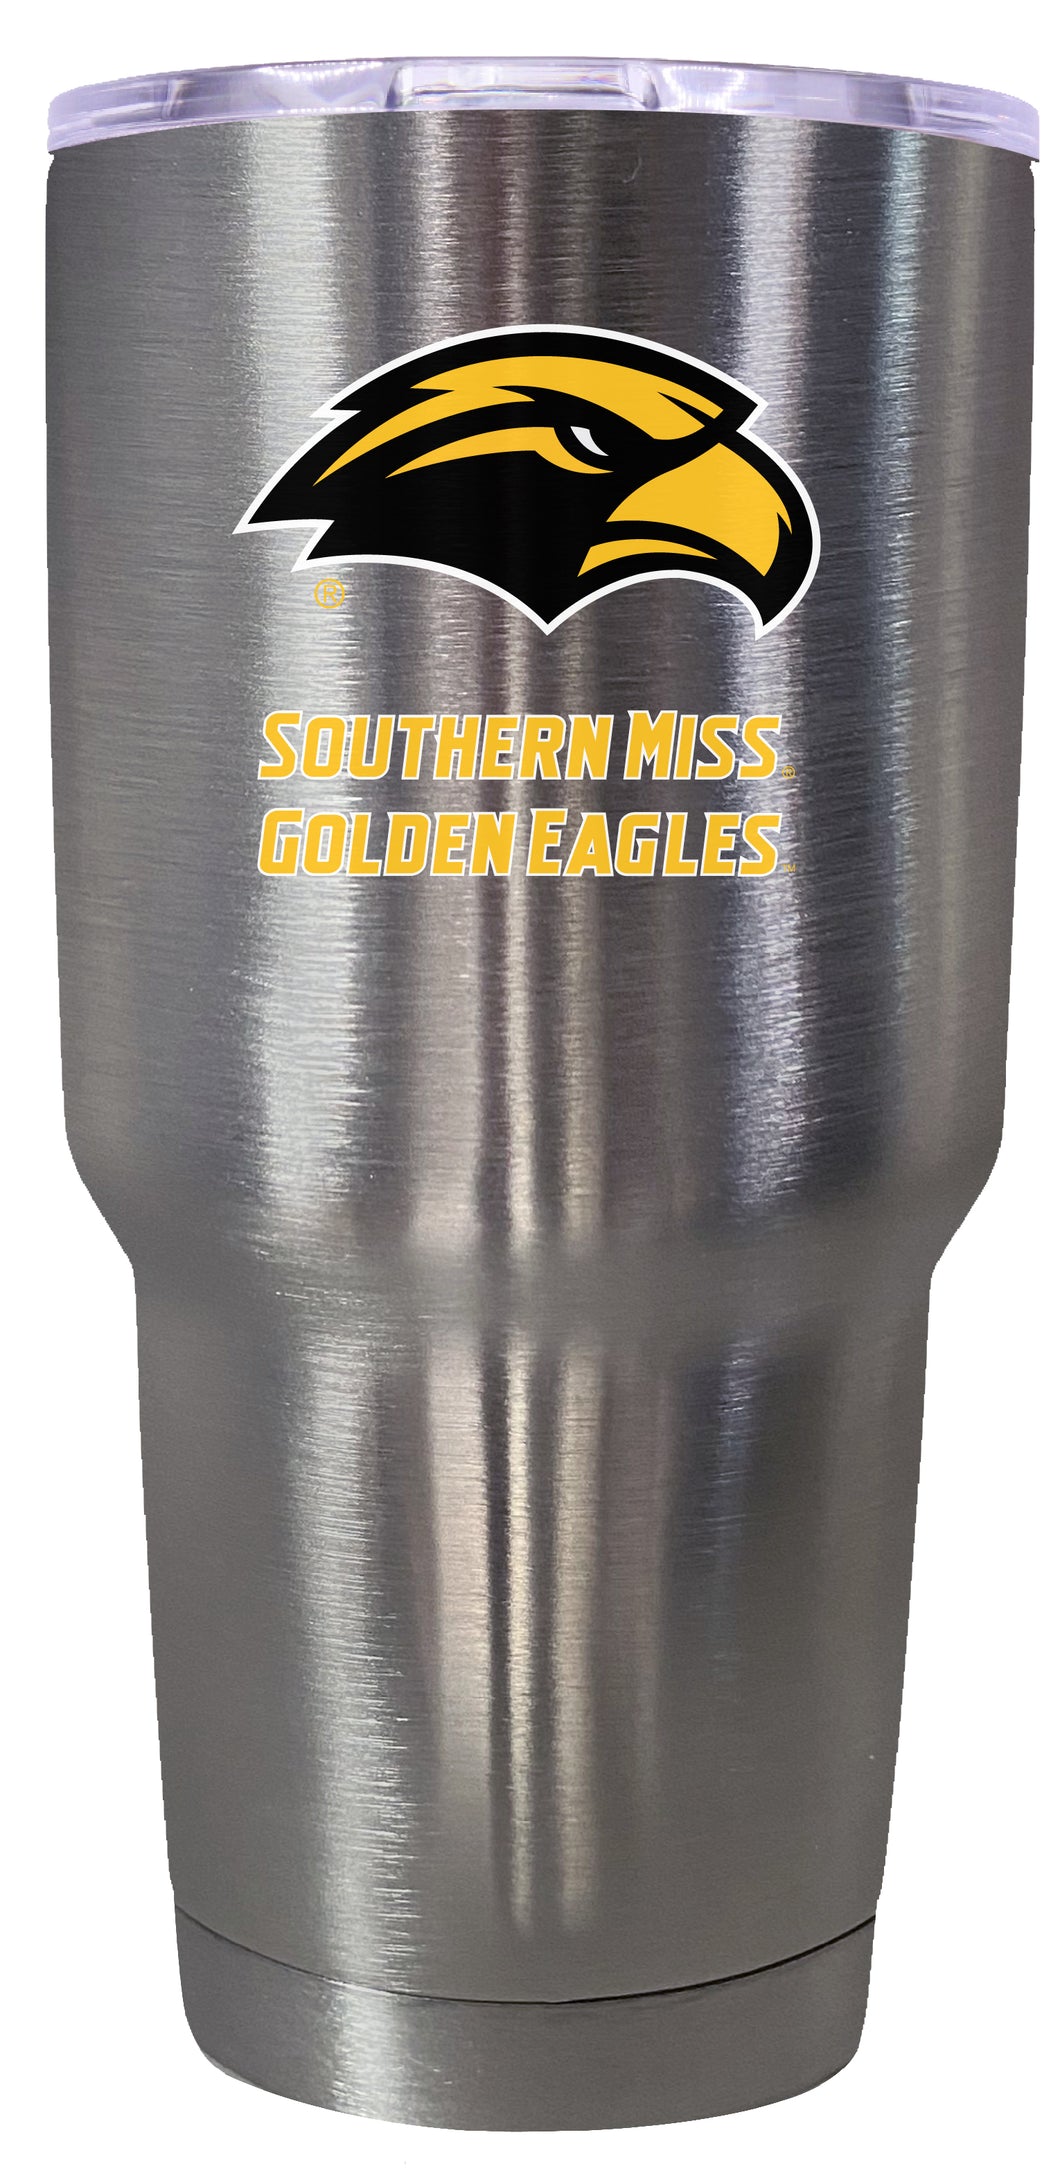 Southern Mississippi Golden Eagles Mascot Logo Tumbler - 24oz Color-Choice Insulated Stainless Steel Mug